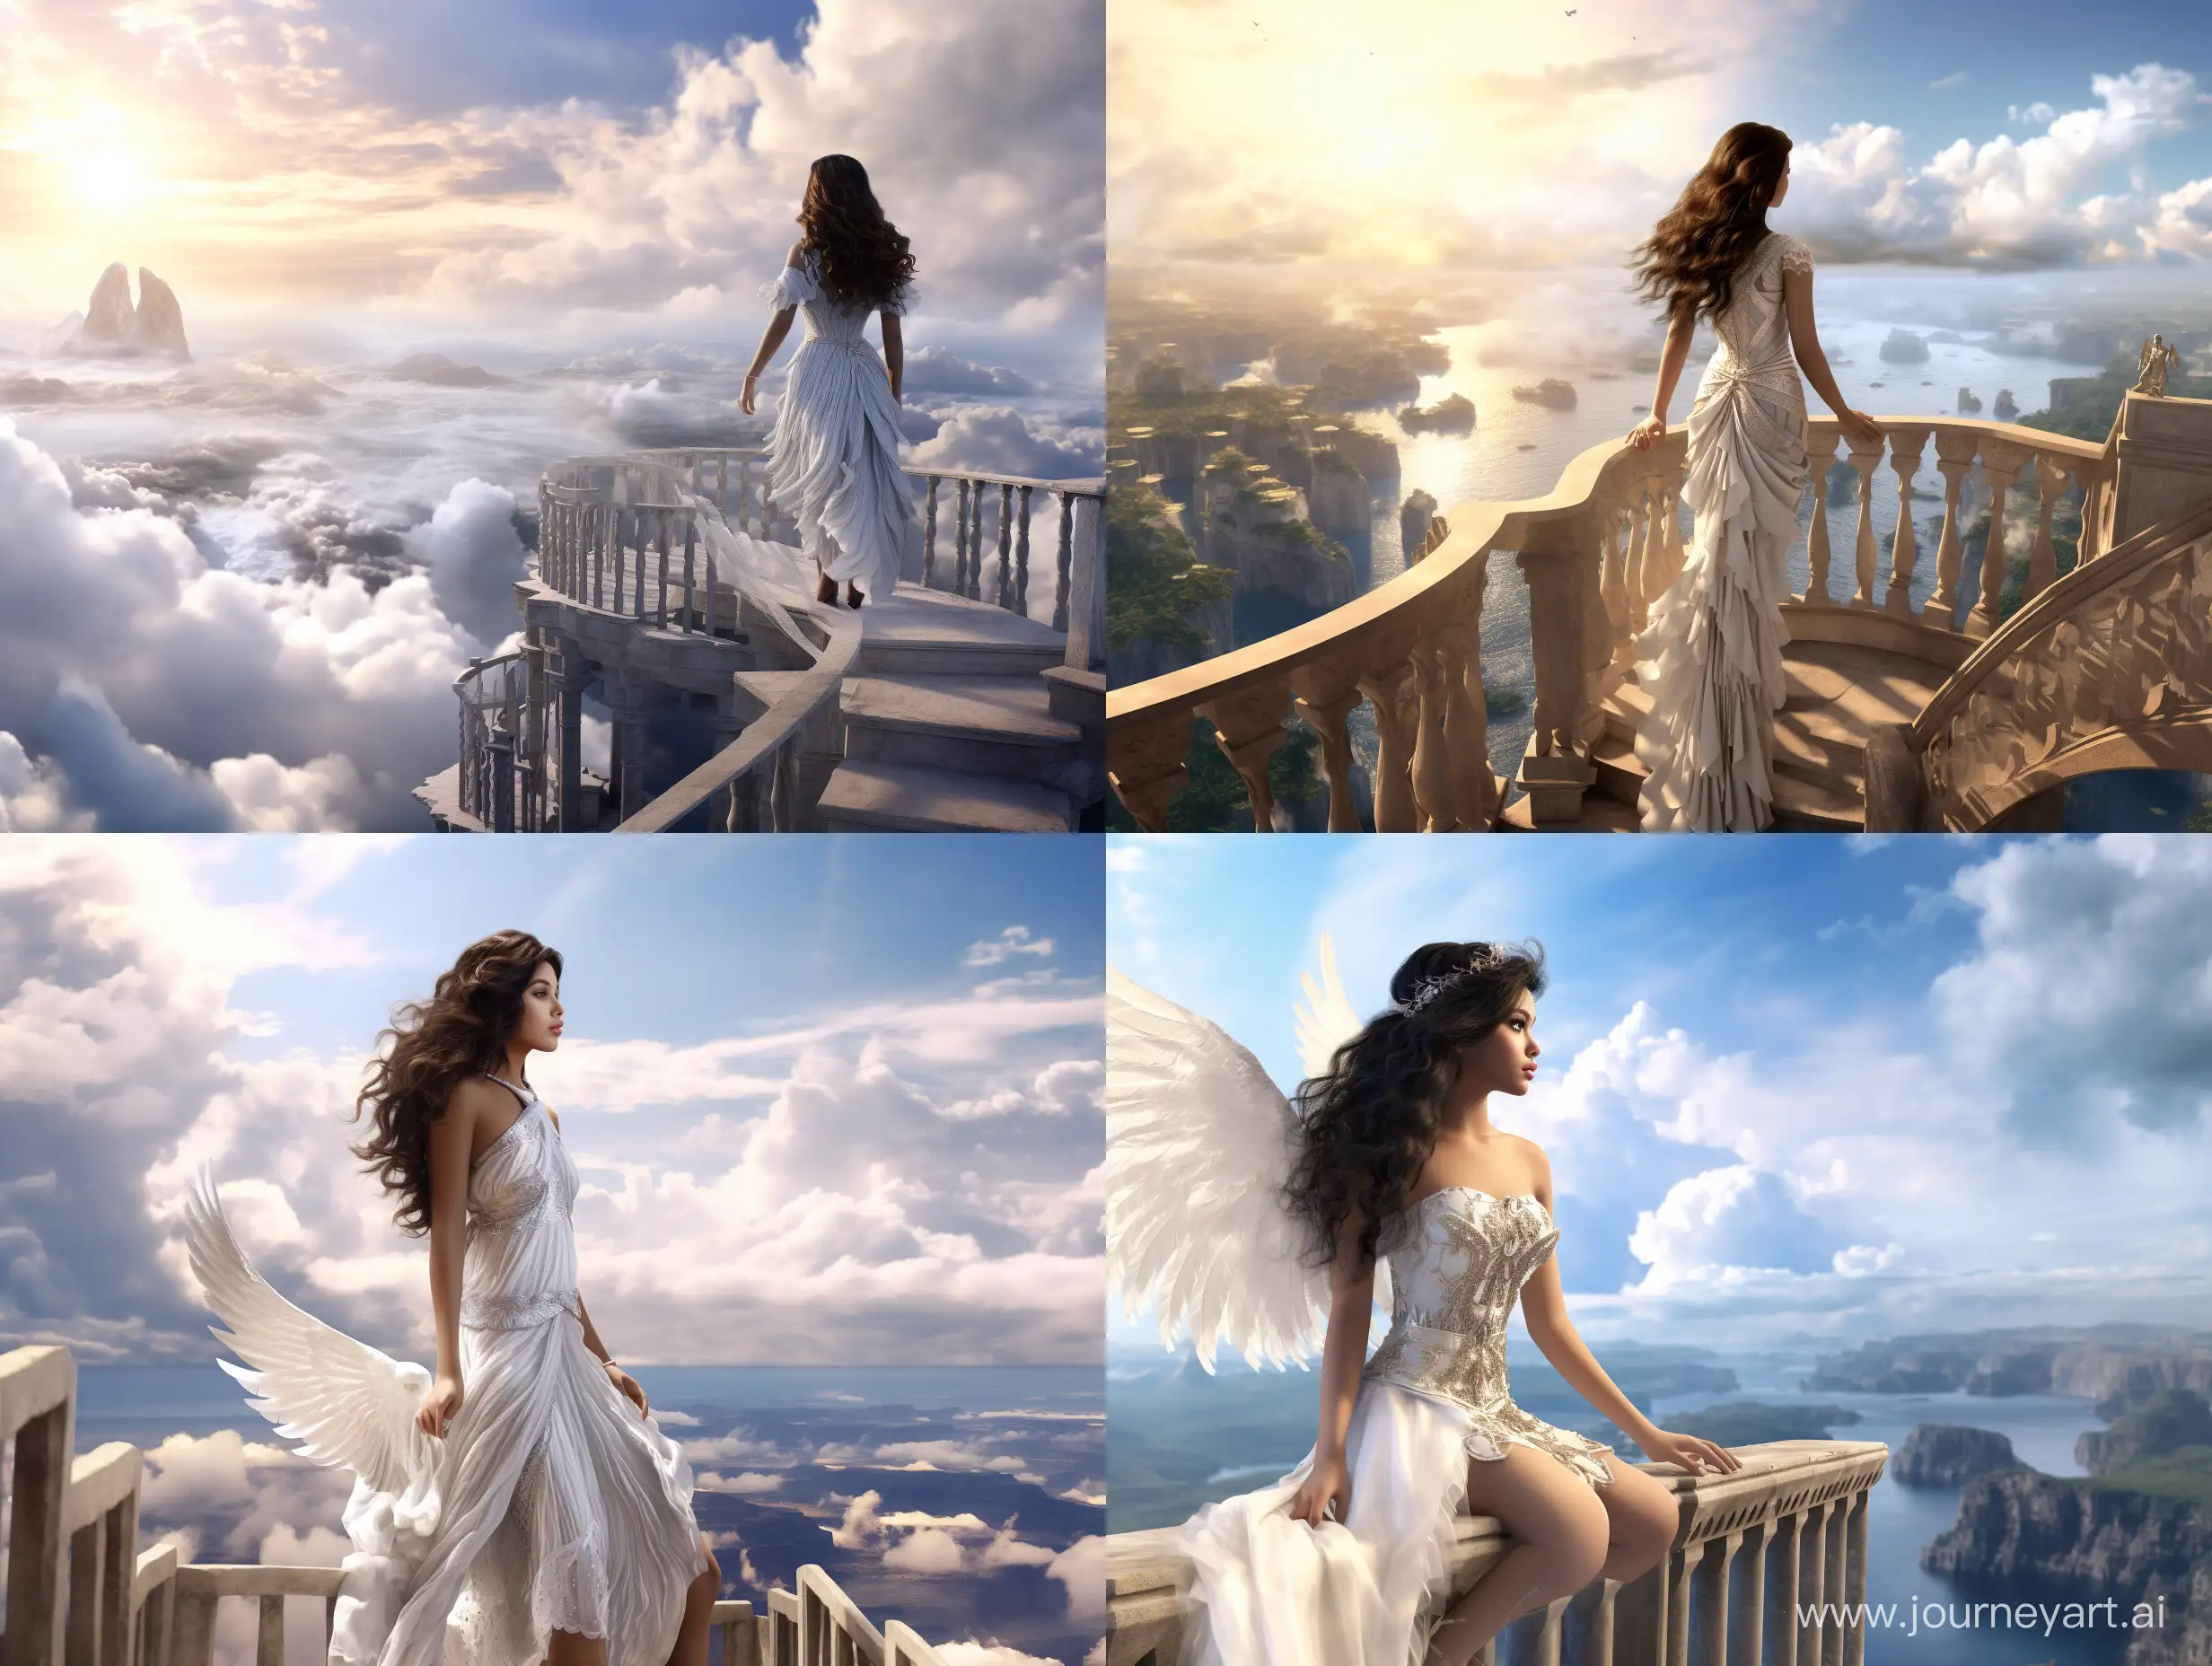 Selena Gomez, dressed in angelic attire, stands on a balcony overlooking a celestial landscape that is sparse and open, with structures made of clouds scattered widely apart. The scene is lit with a bright, cinematic style, emphasizing the open, airy nature of the heavenly environment. The background features vast expanses of sky and a few distant angels, creating a sense of tranquility and spaciousness. The woman gazes thoughtfully into the distance, embodying a sense of introspection and calm.